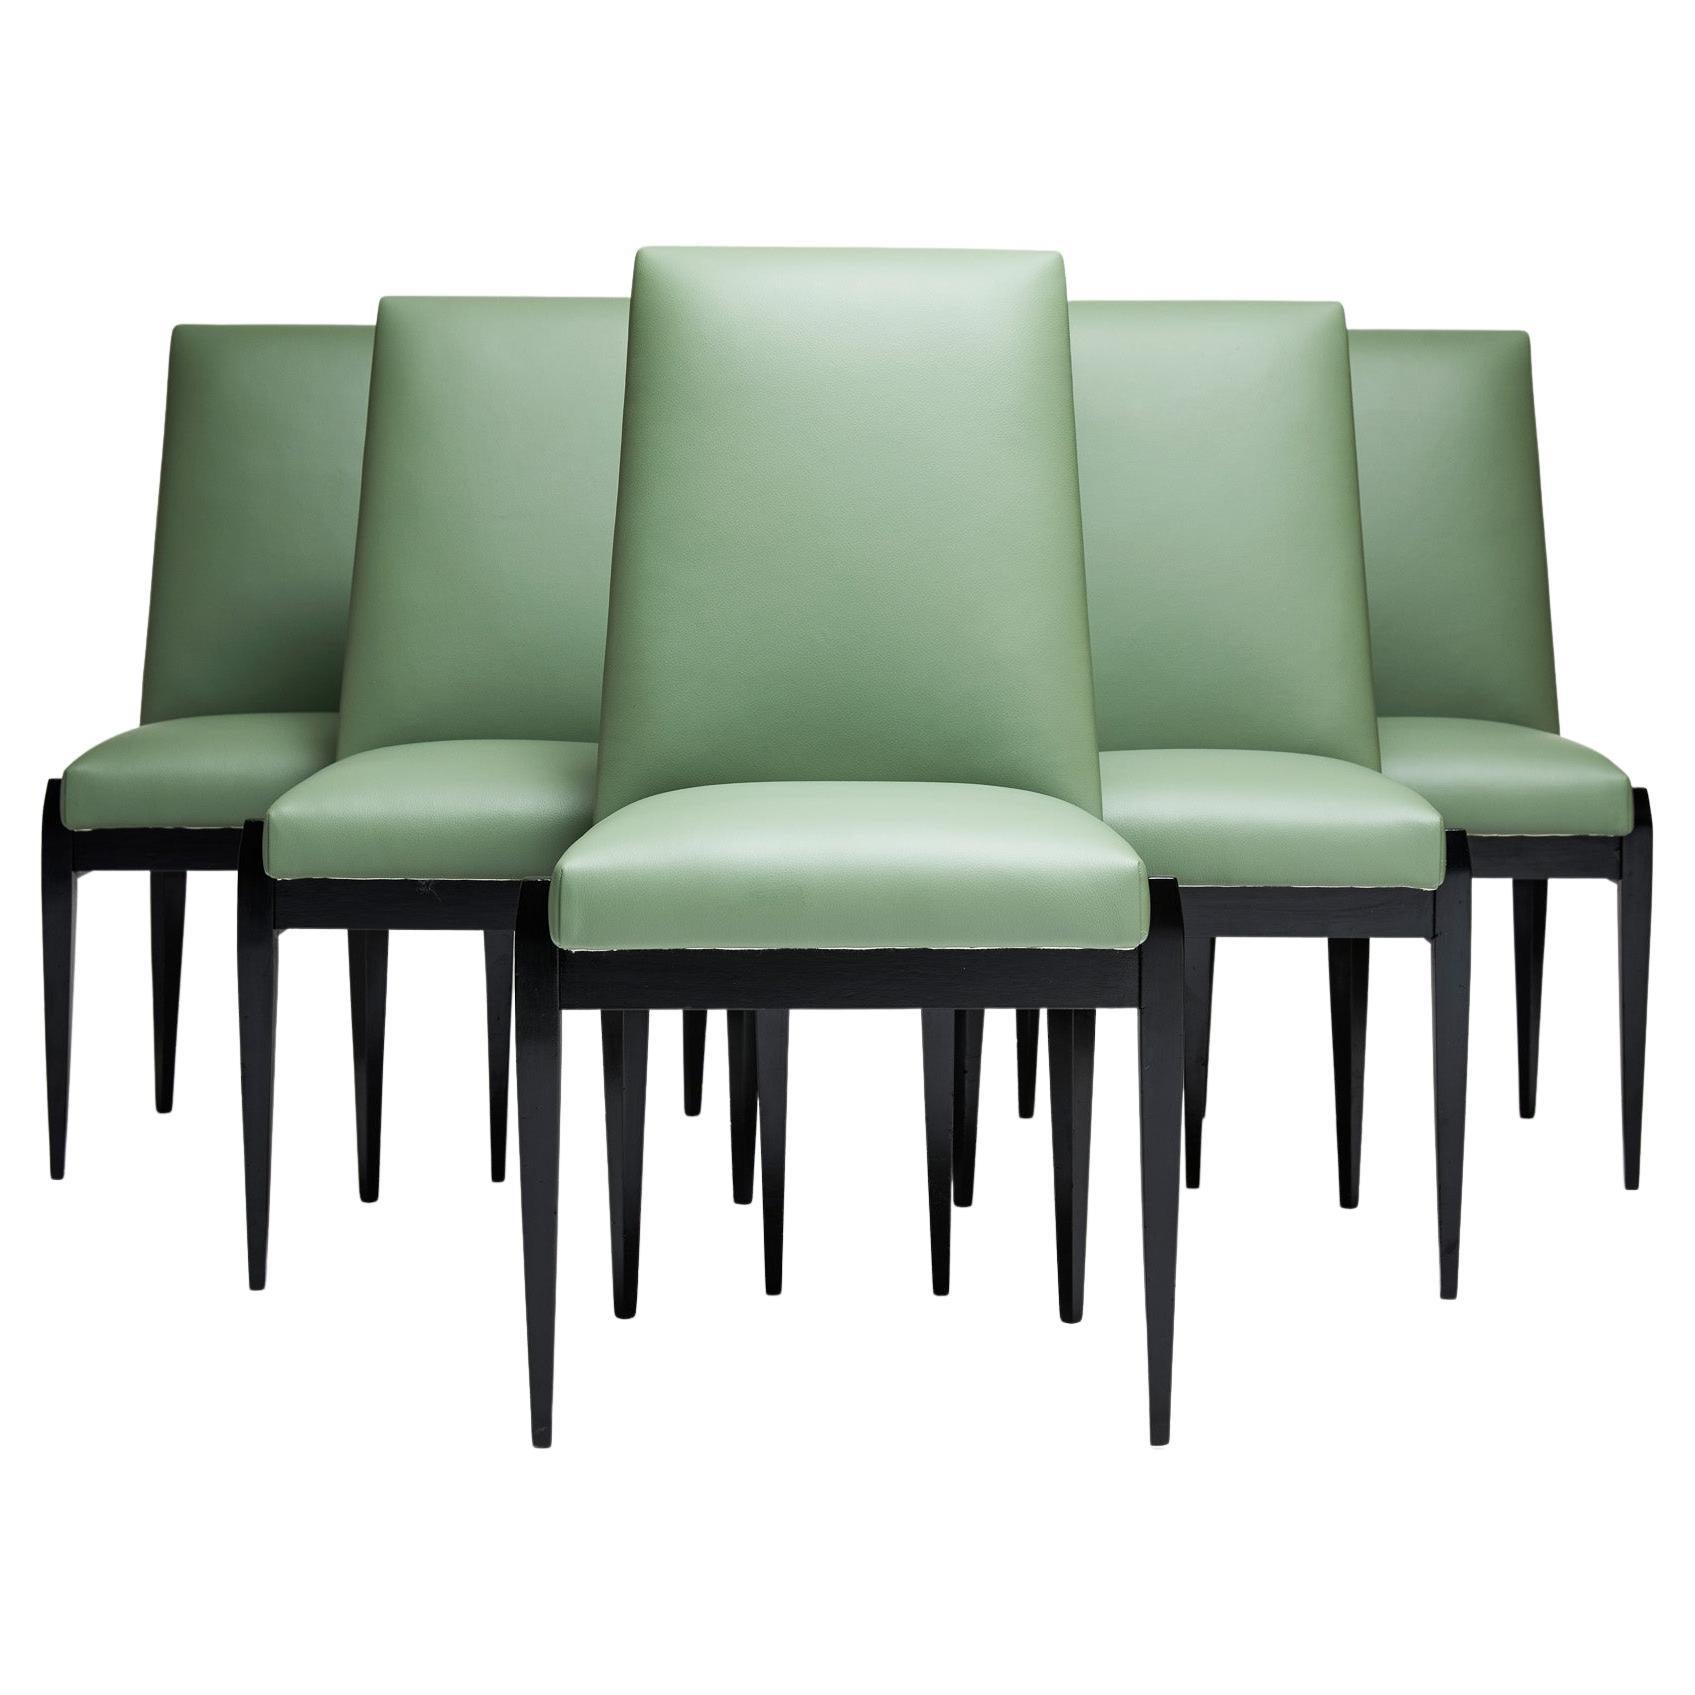 Available today, this candy like, Brazilian Modern set of six dining chairs in hardwood & green leather by Cimo, are breathtaking.

The set consists of 6 dining chairs in ebonized hardwood frame and leather seats. The wood has been refinished and